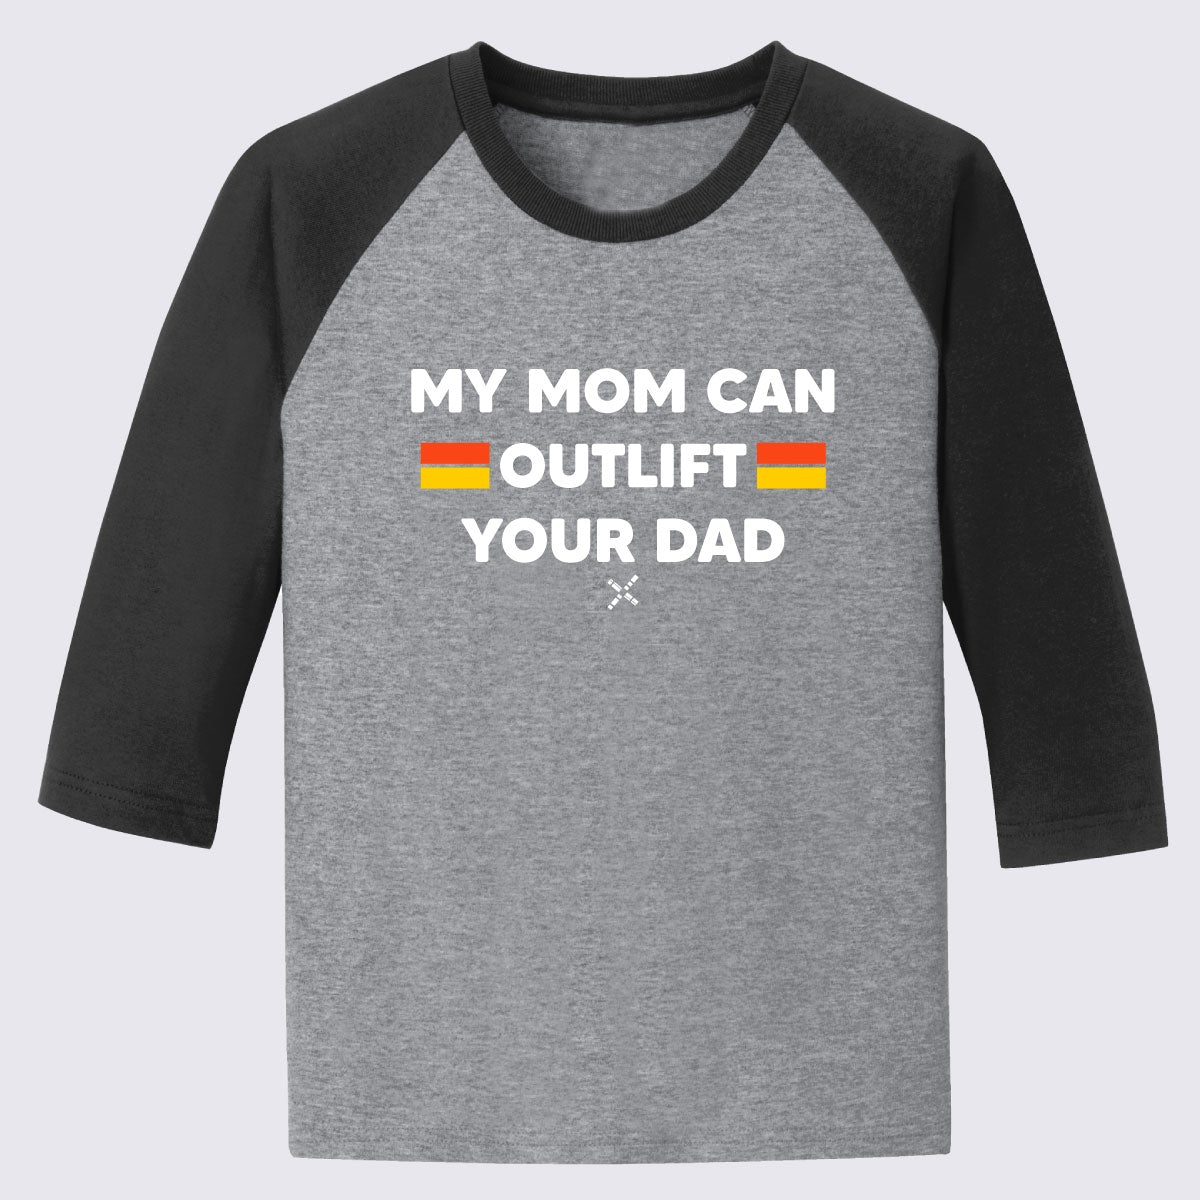 My Mom Can Outlift Your Dad Youth 3/4-Sleeve Raglan Tee